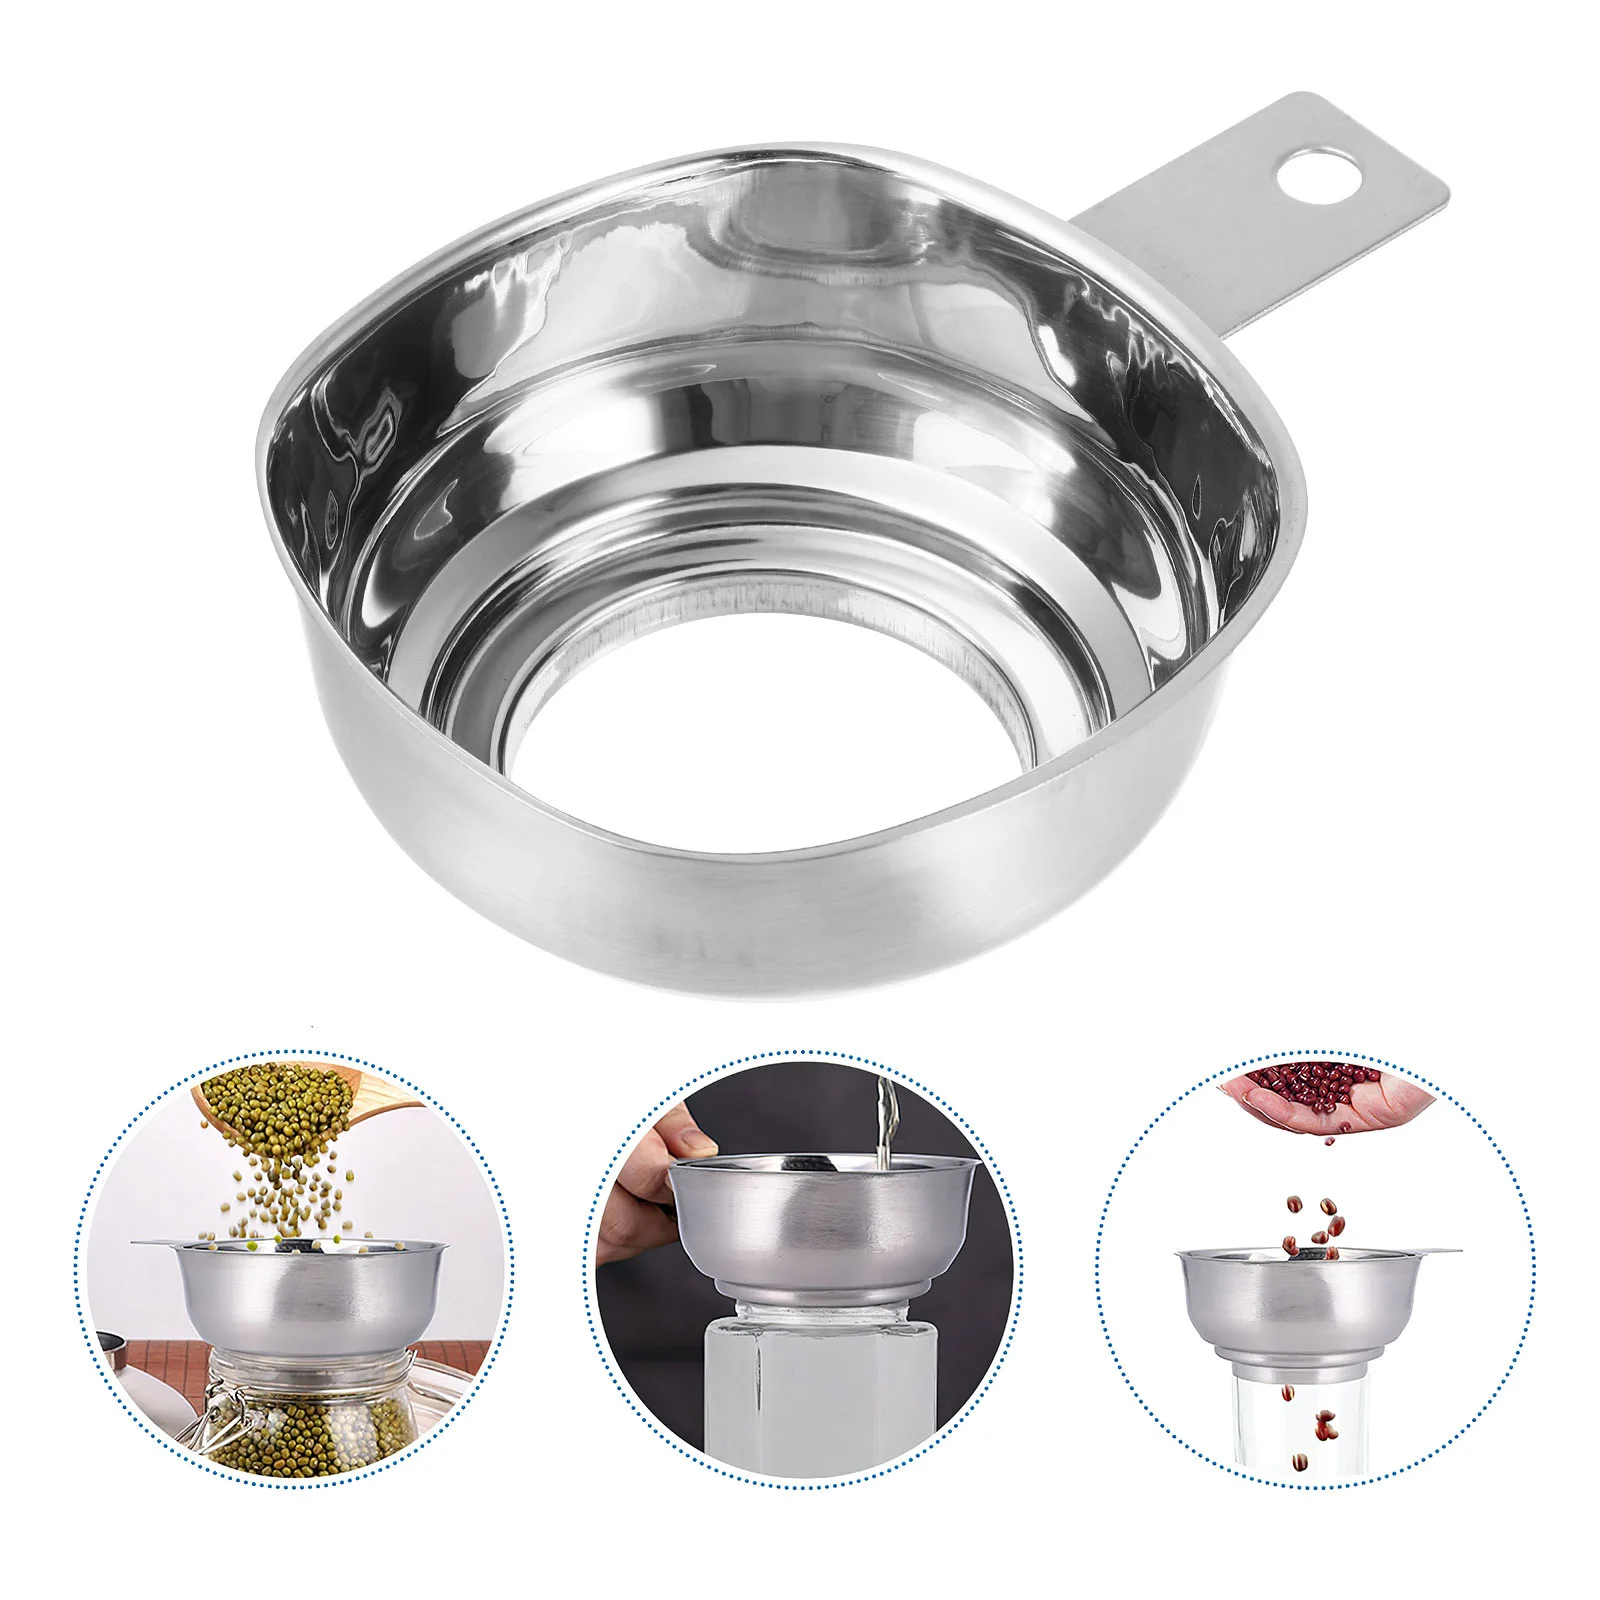 

Wide Mouth Funnel with Handle Stainless Steel Funnels Kitchen Large Jam Meats Filling Funnel Gadget for Restaurant Home Funil